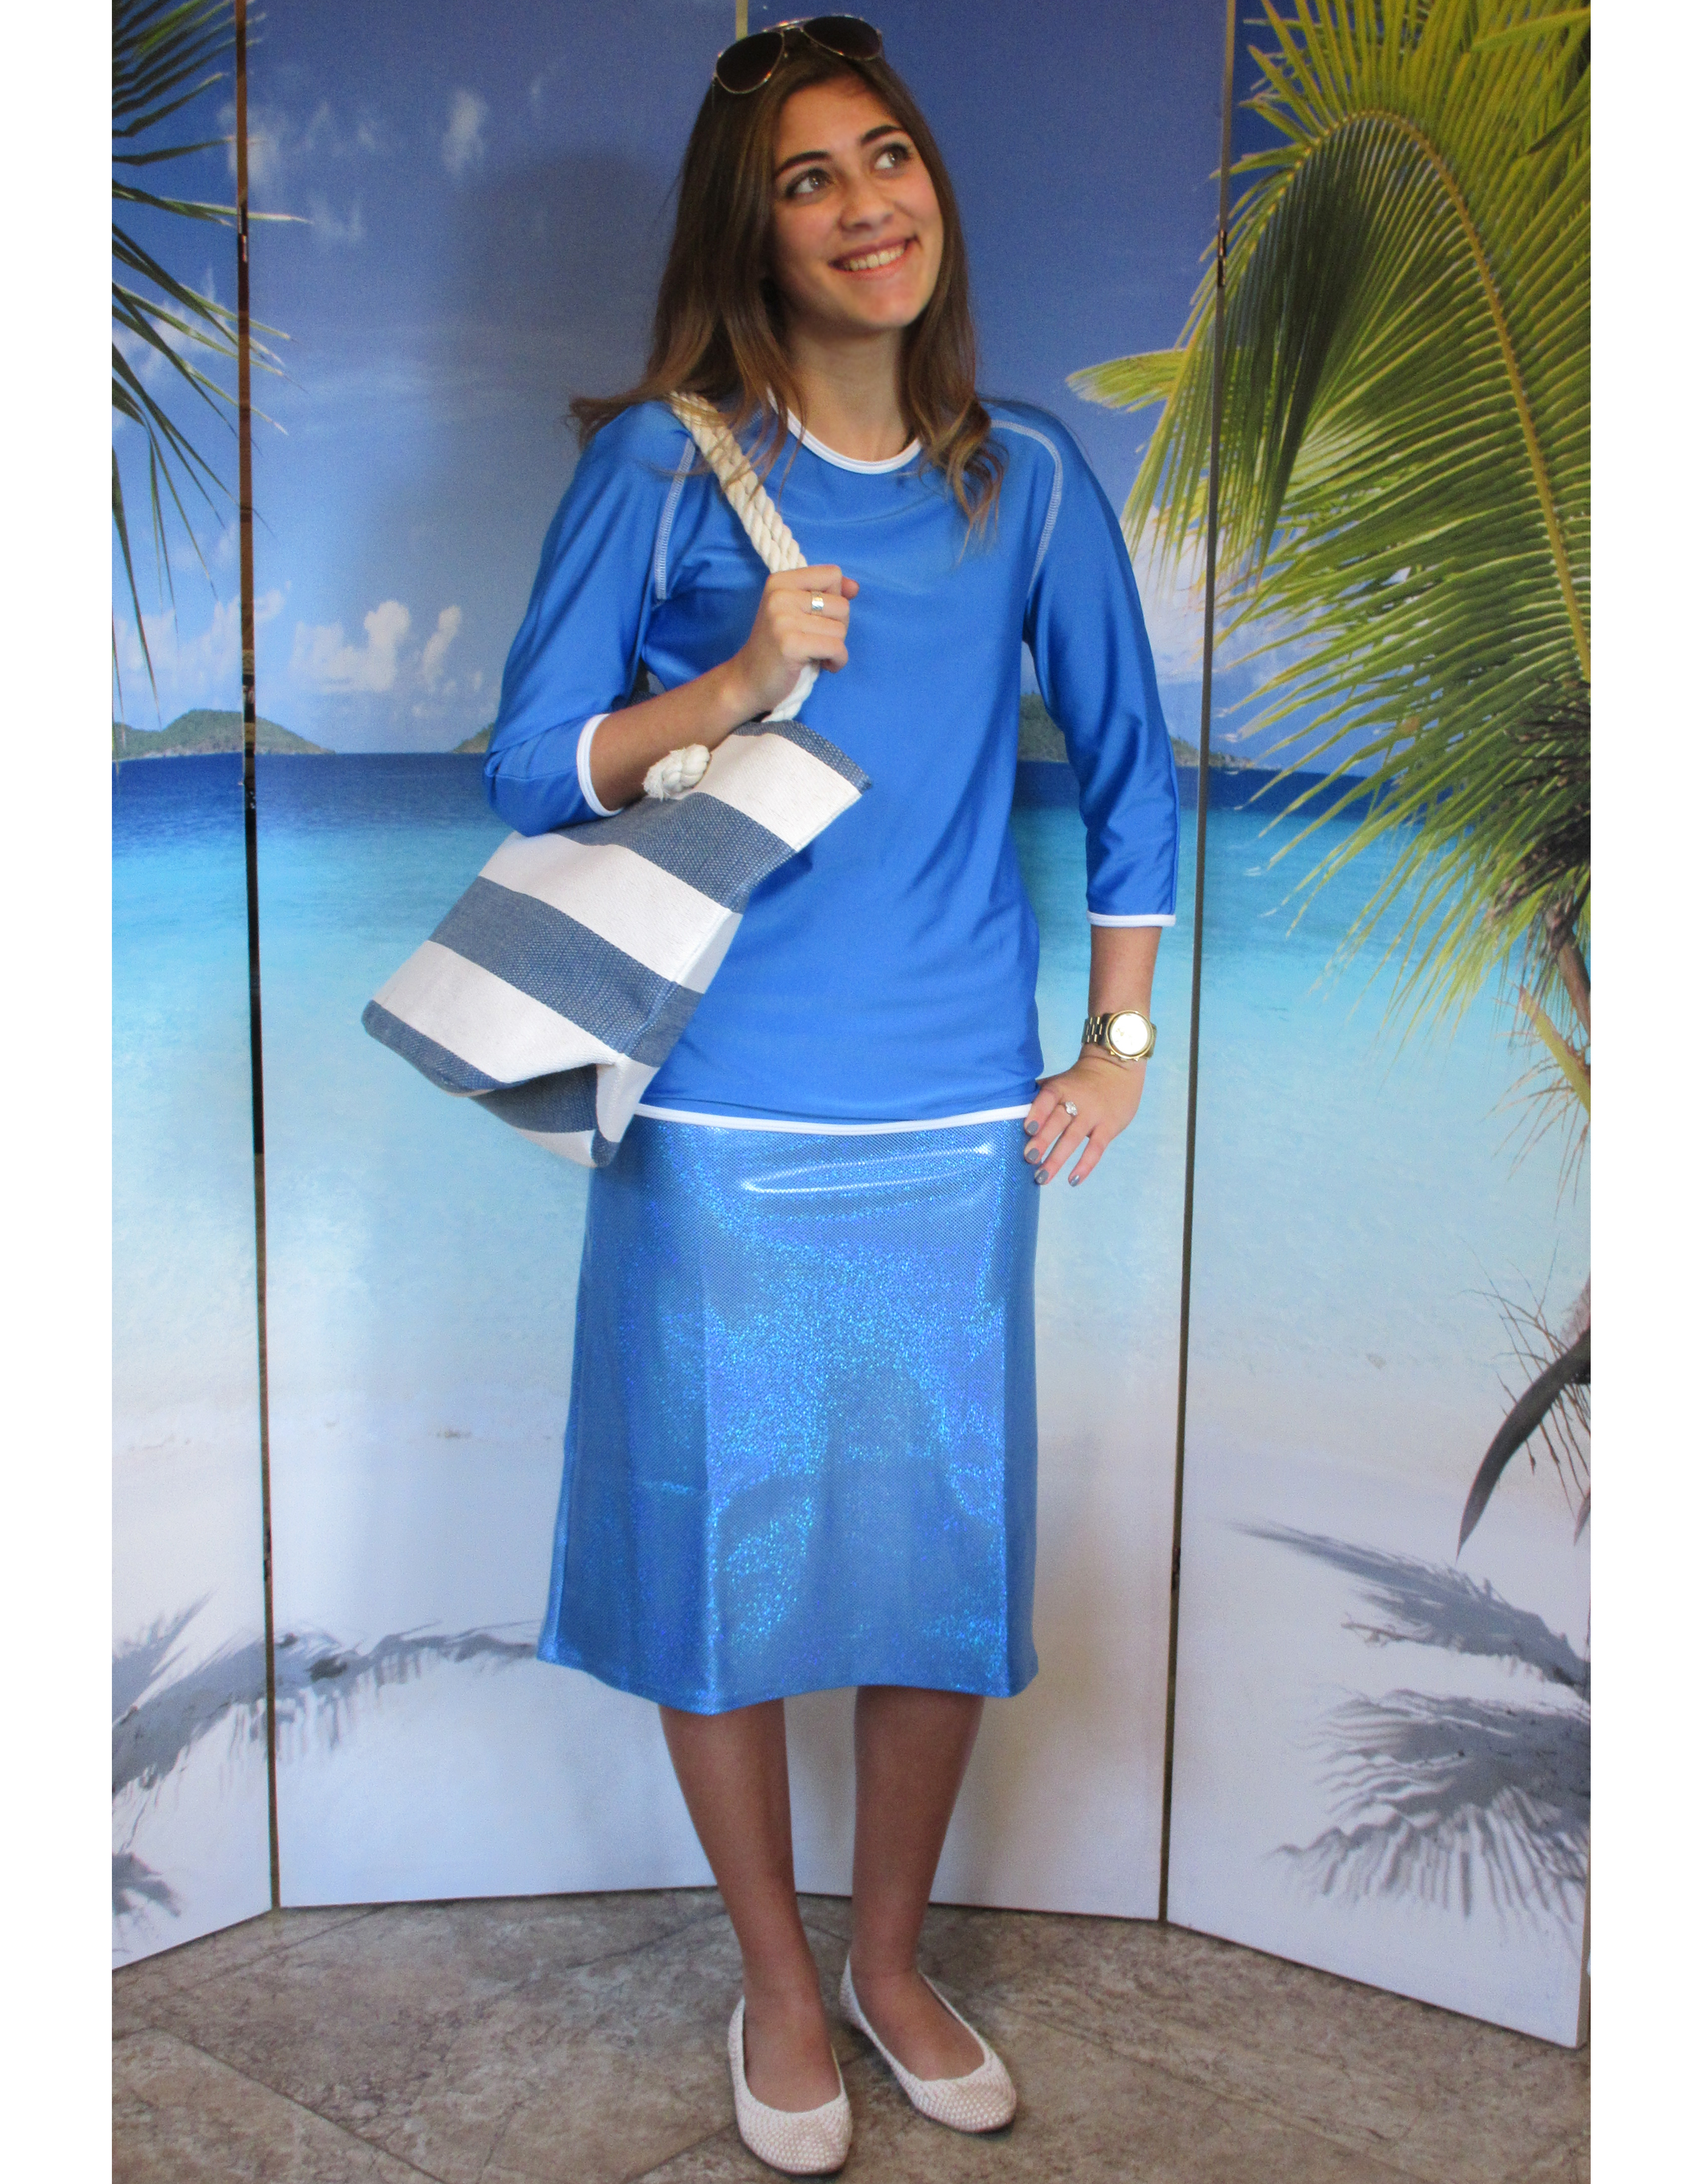 model-wearing-style-2629-in-sailing-blue-with-sparkle-blue-skirt-and-beach-bag.jpg